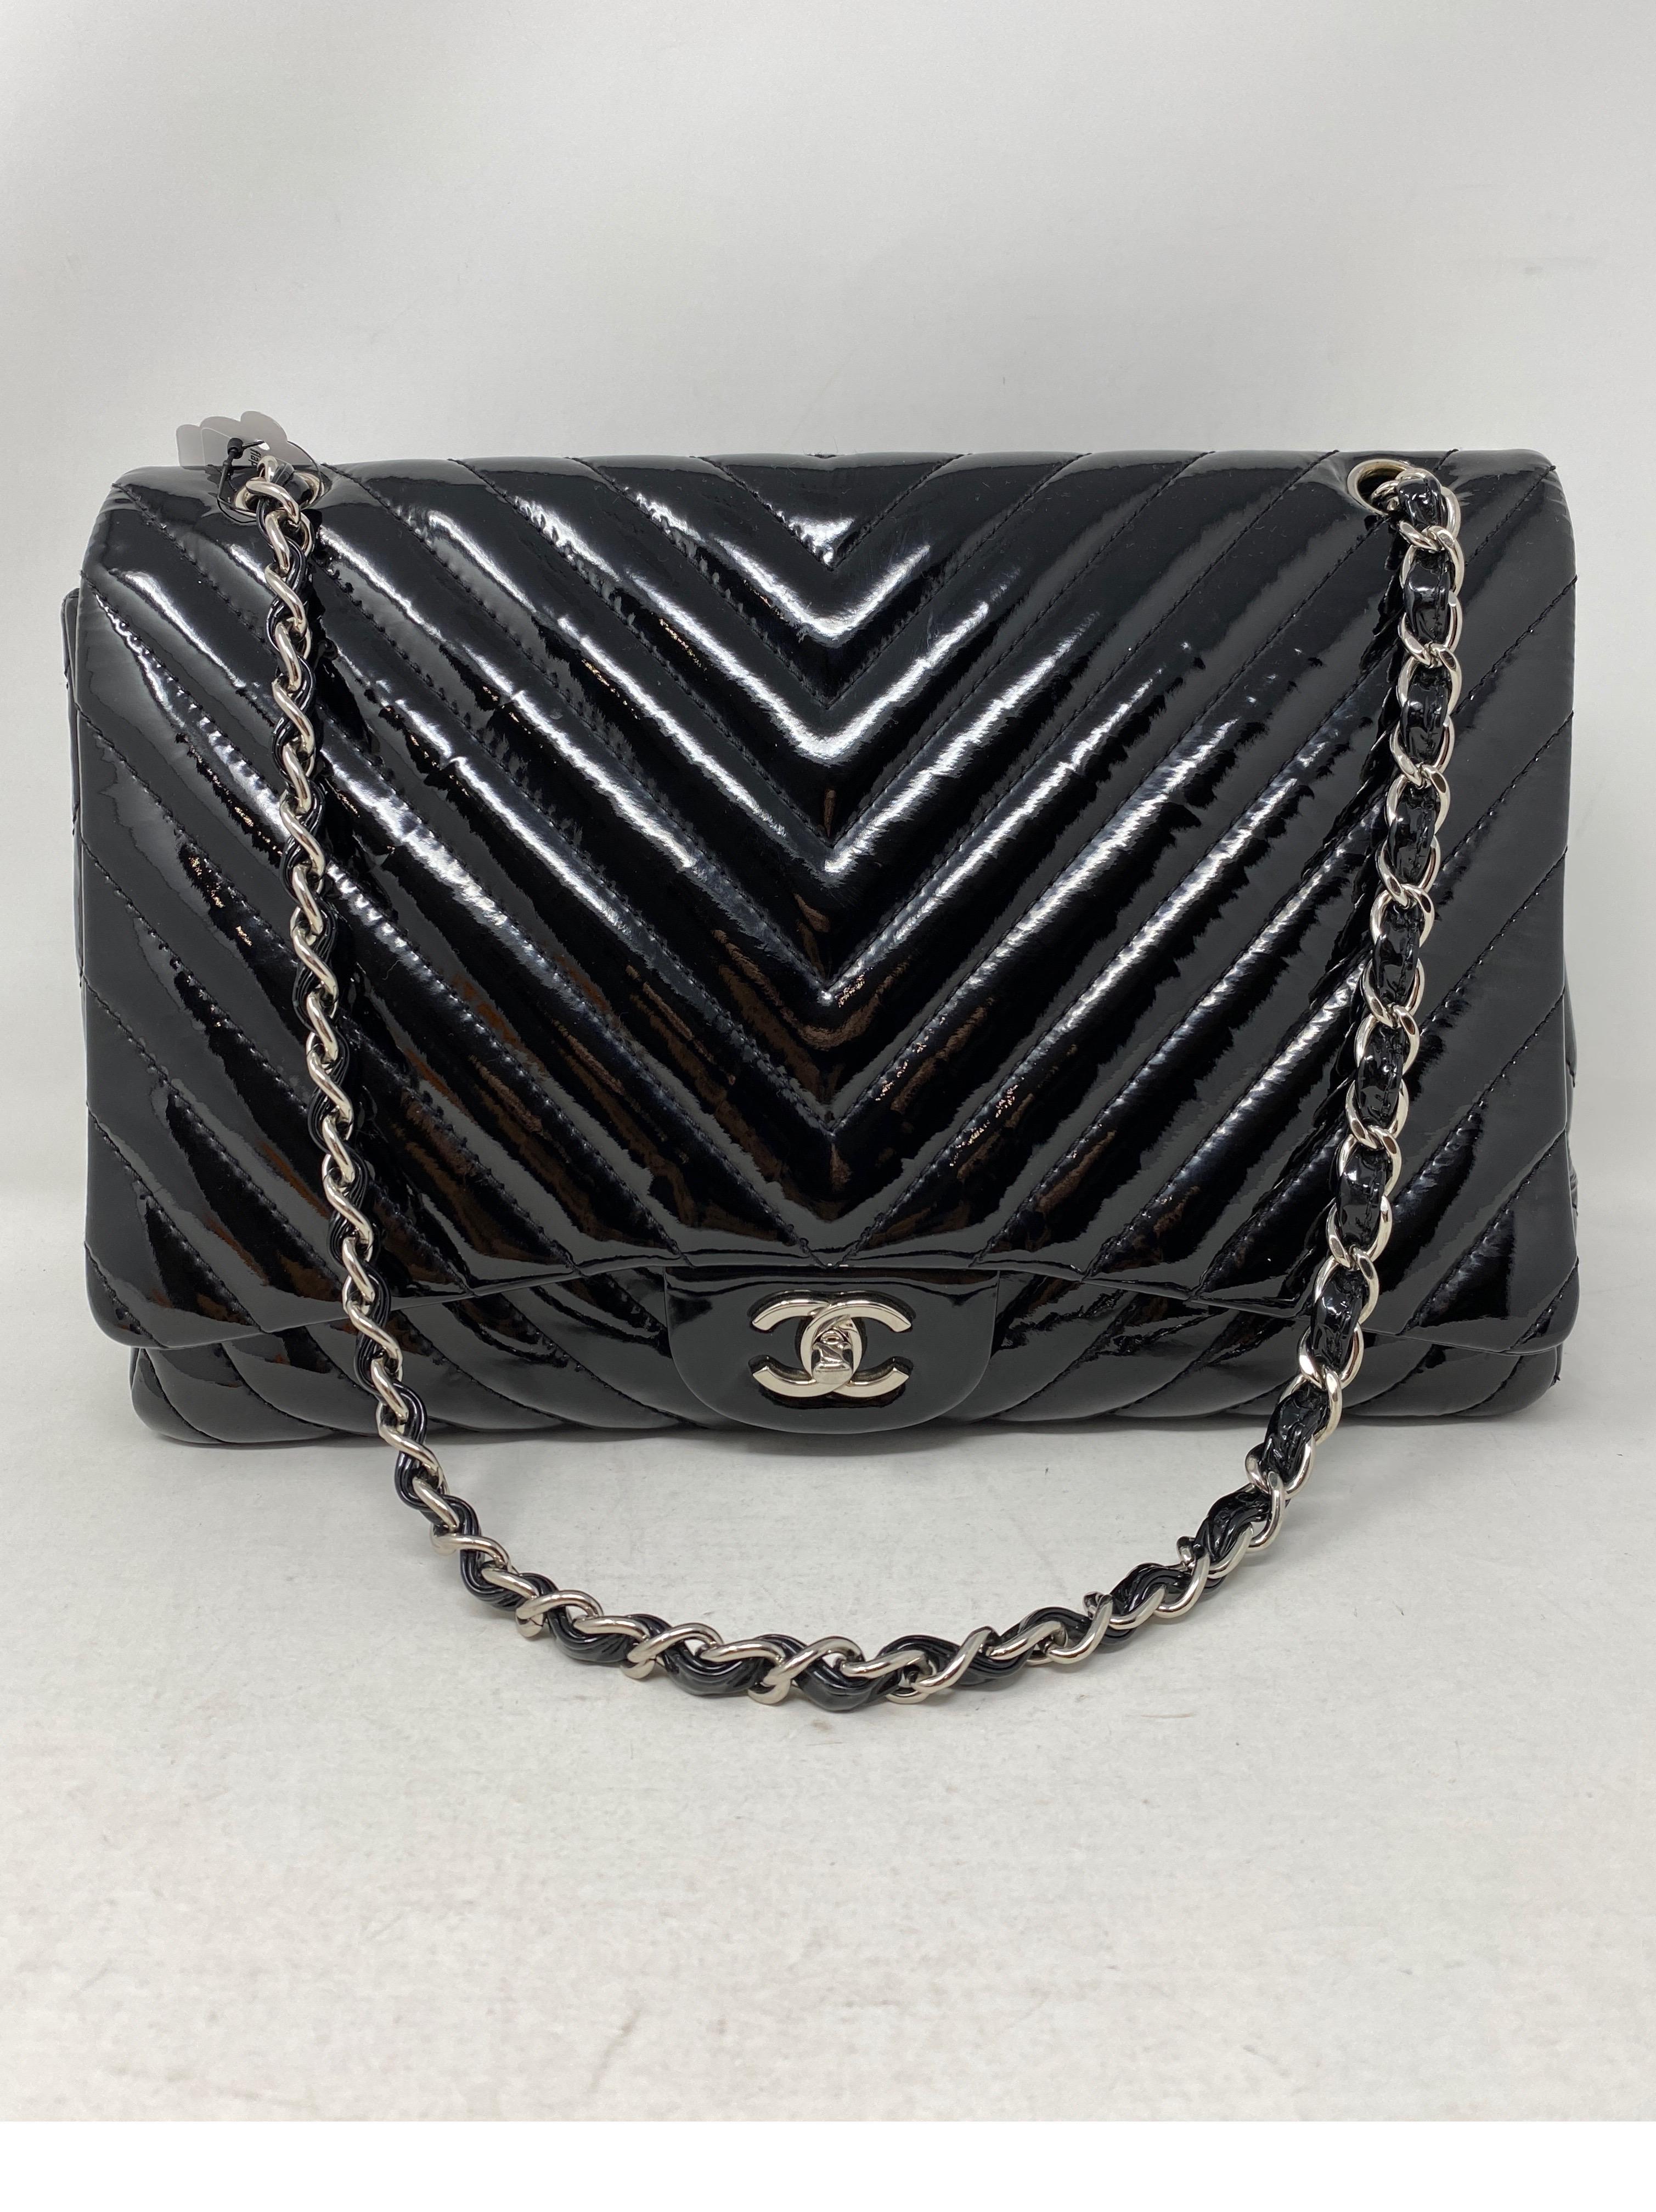 Chanel Black Jumbo Patent Leather Bag. Silver hardware. Good condition. Can be worn doubled or as a crossbody. Single flap. Good condition. Serial number inside the bag. Guaranteed authentic. 